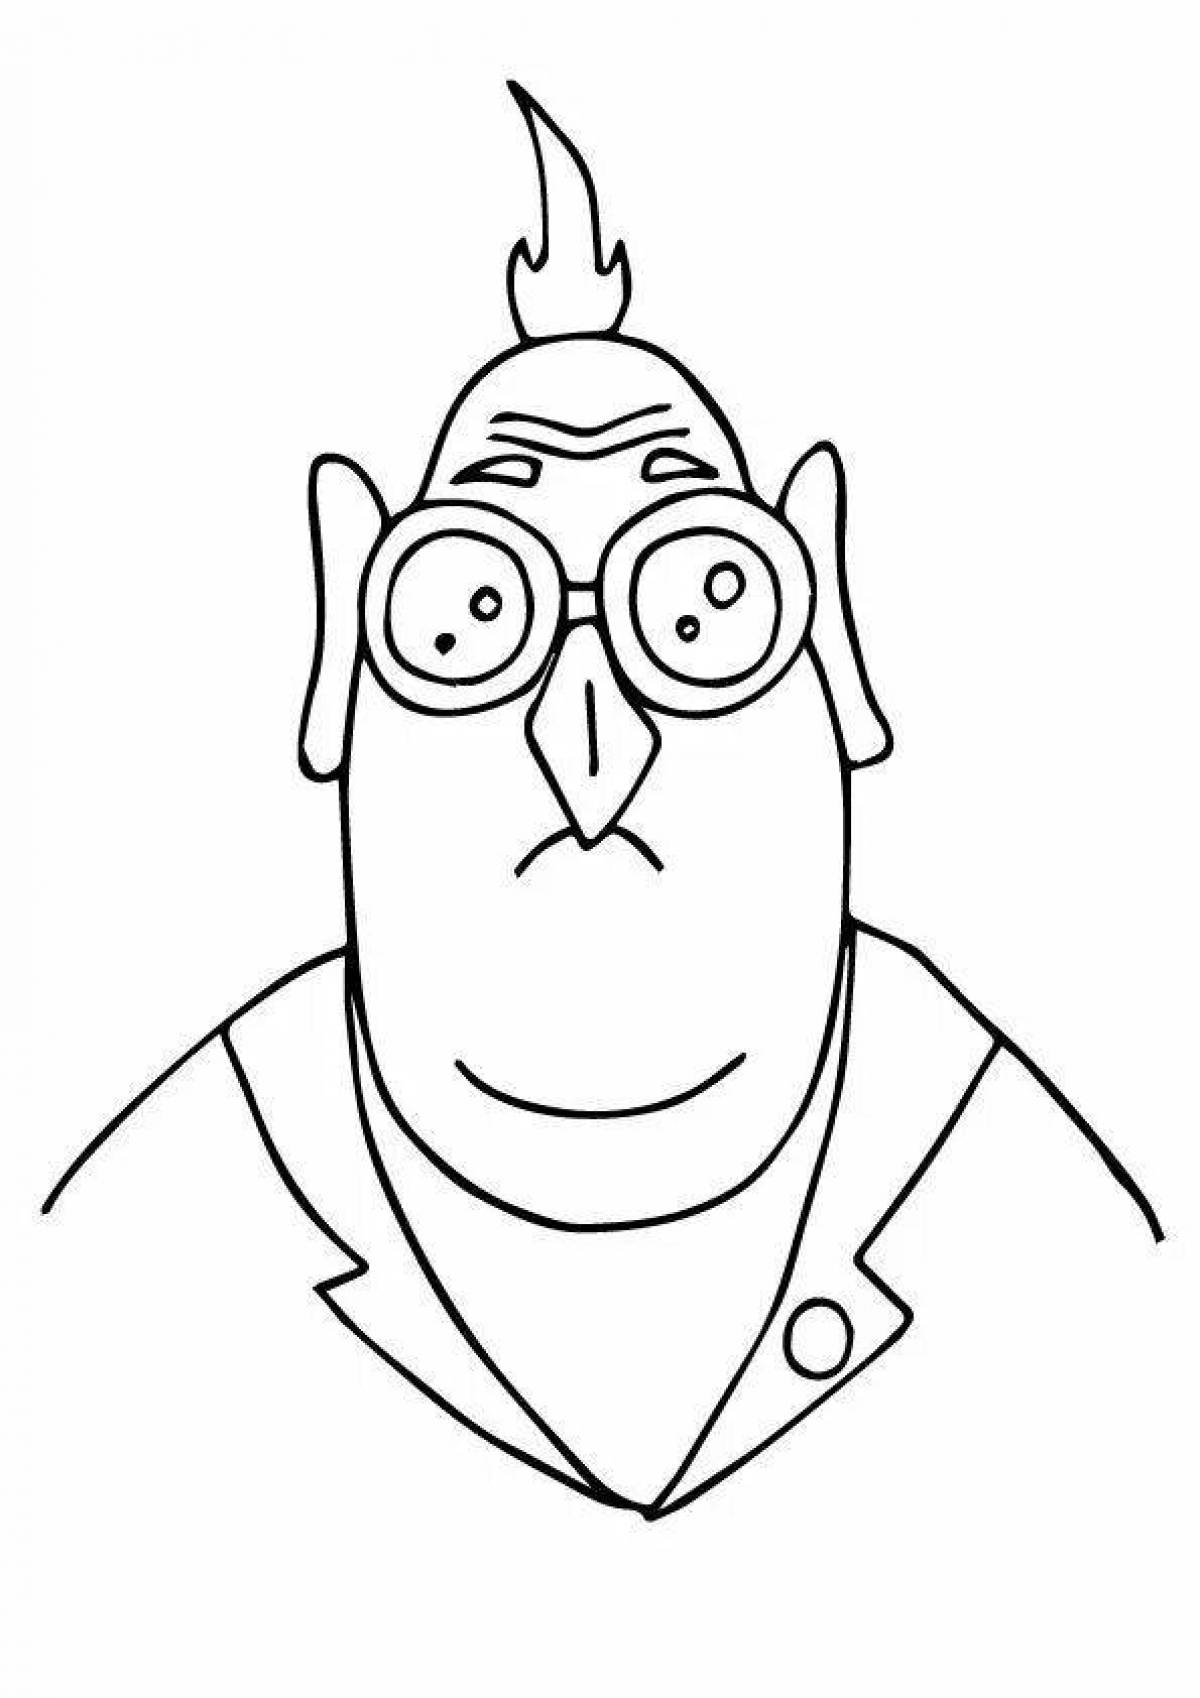 Gru's intriguing coloring page